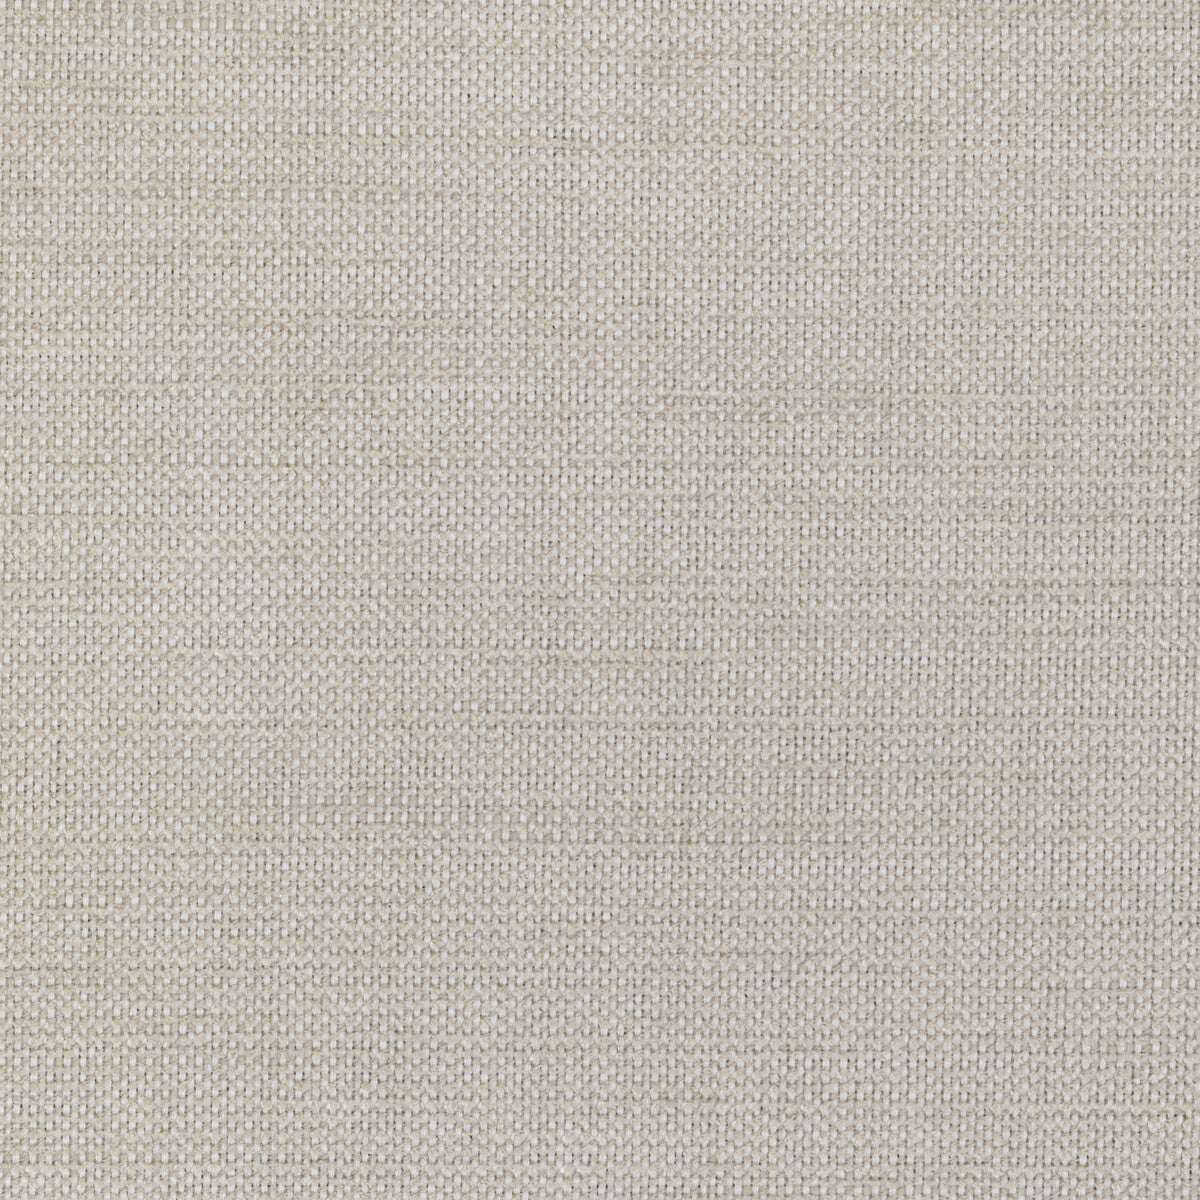 Kravet Smart fabric in 36302-11 color - pattern 36302.11.0 - by Kravet Smart in the Performance Crypton Home collection